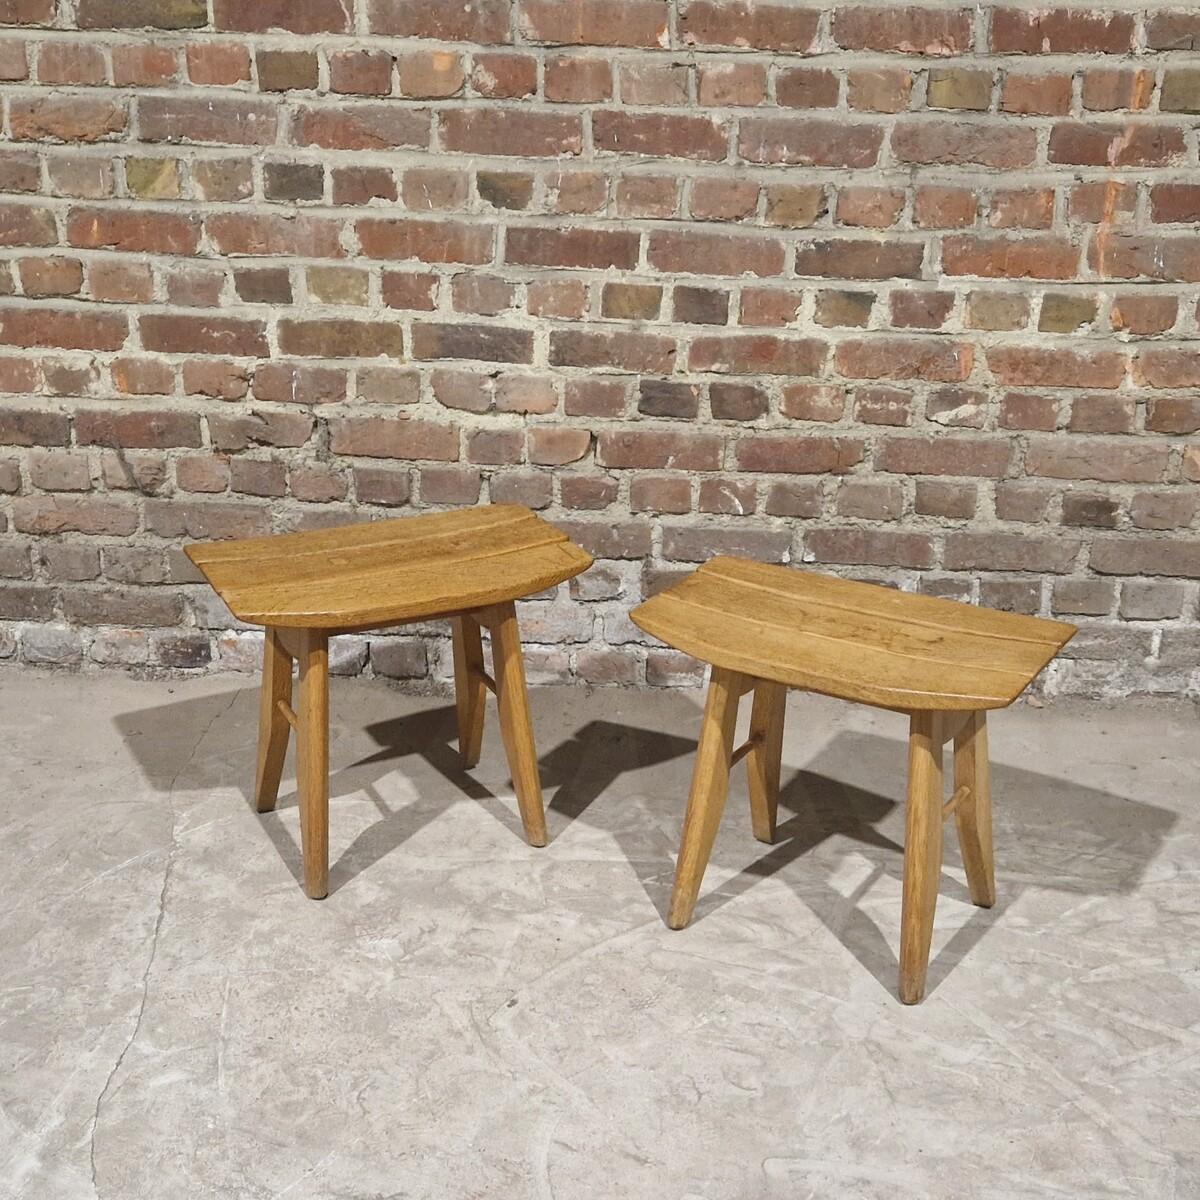 Two stools in the model 